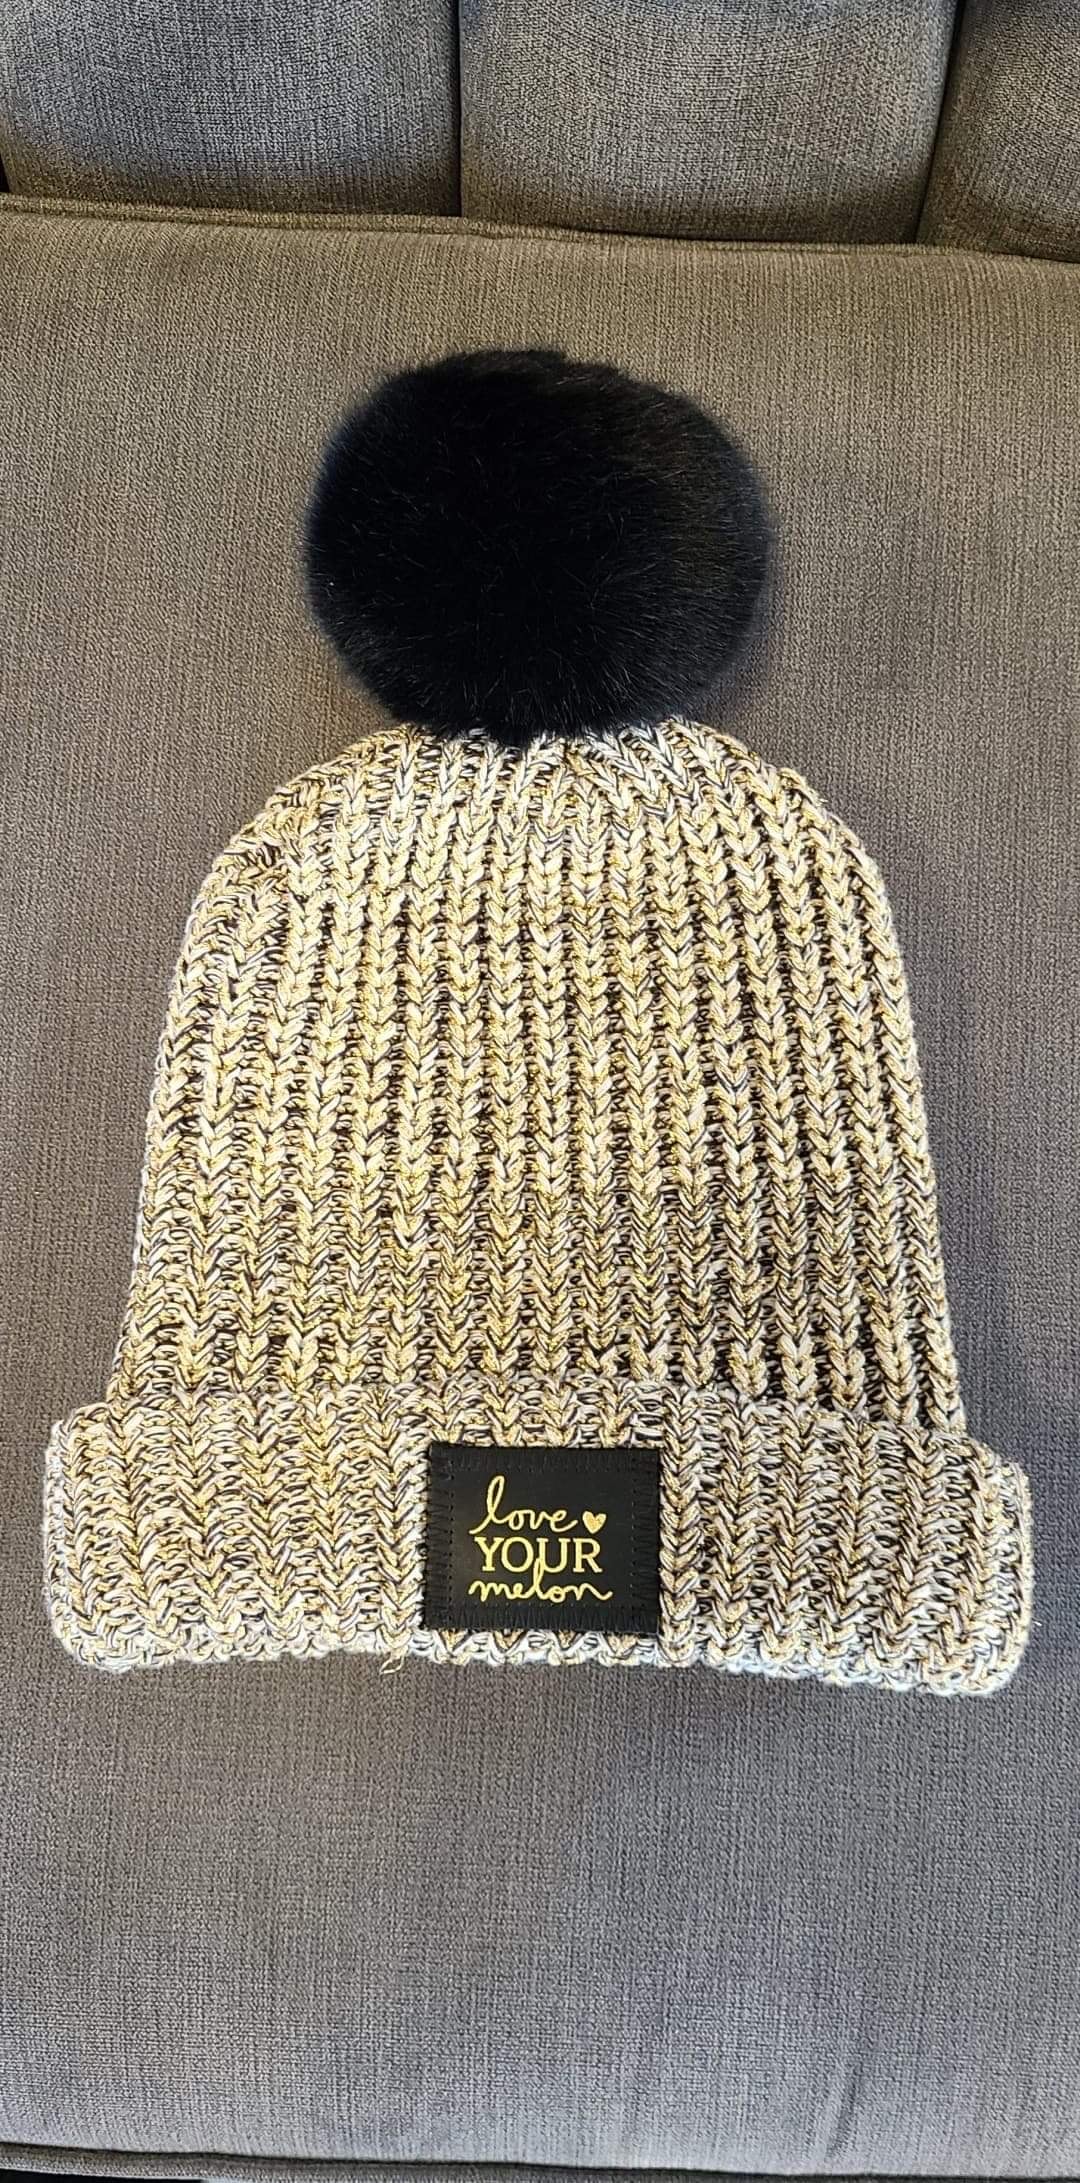 Love Your Melon Toques Gold Cream with Black Pom